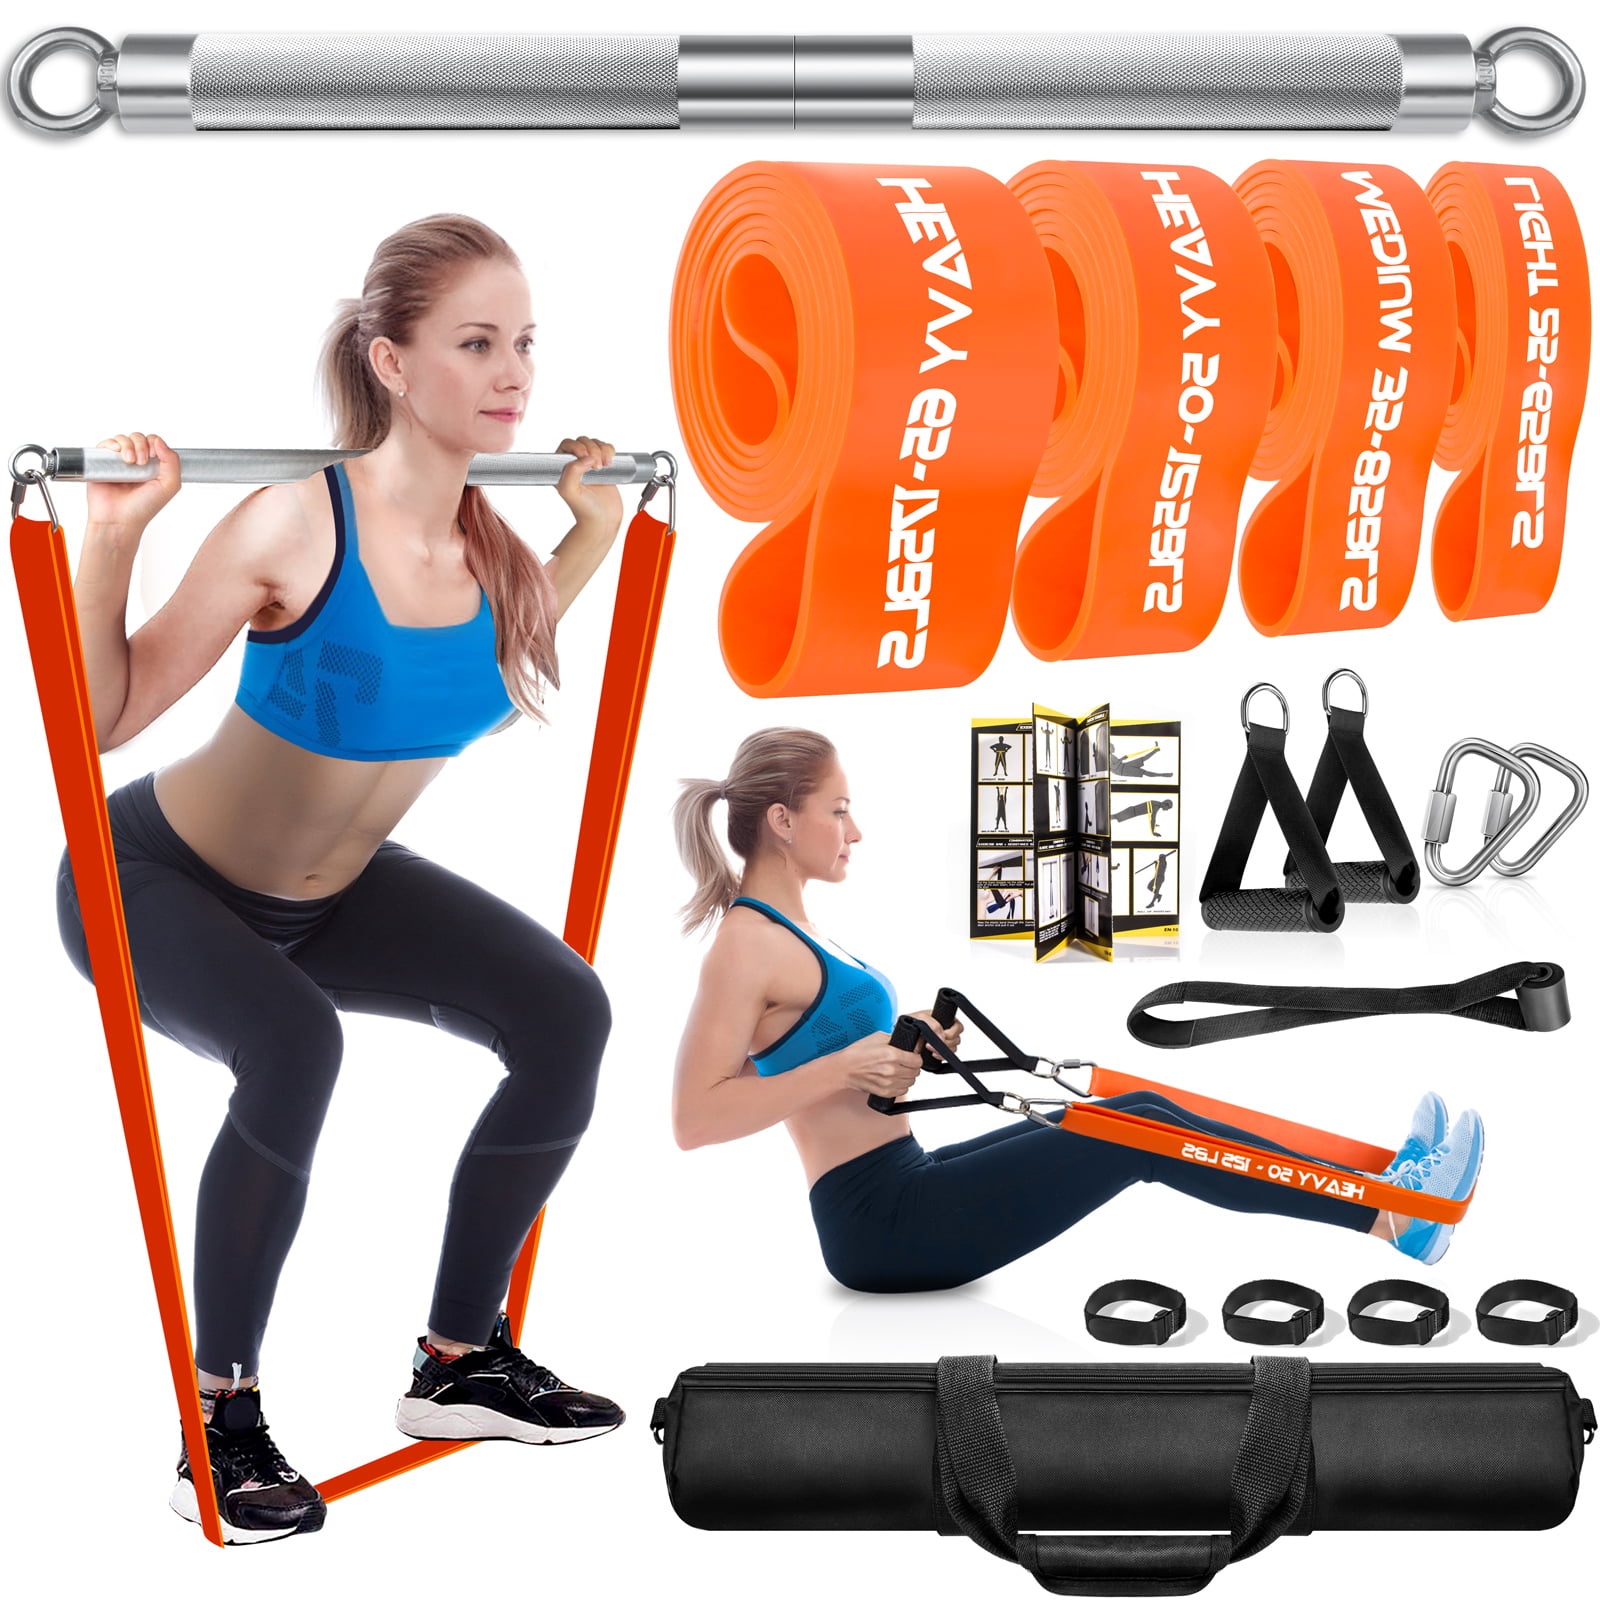 Portable Home Gym Resistance Bar Set w 4 Resistance Levels Full Body Workout 